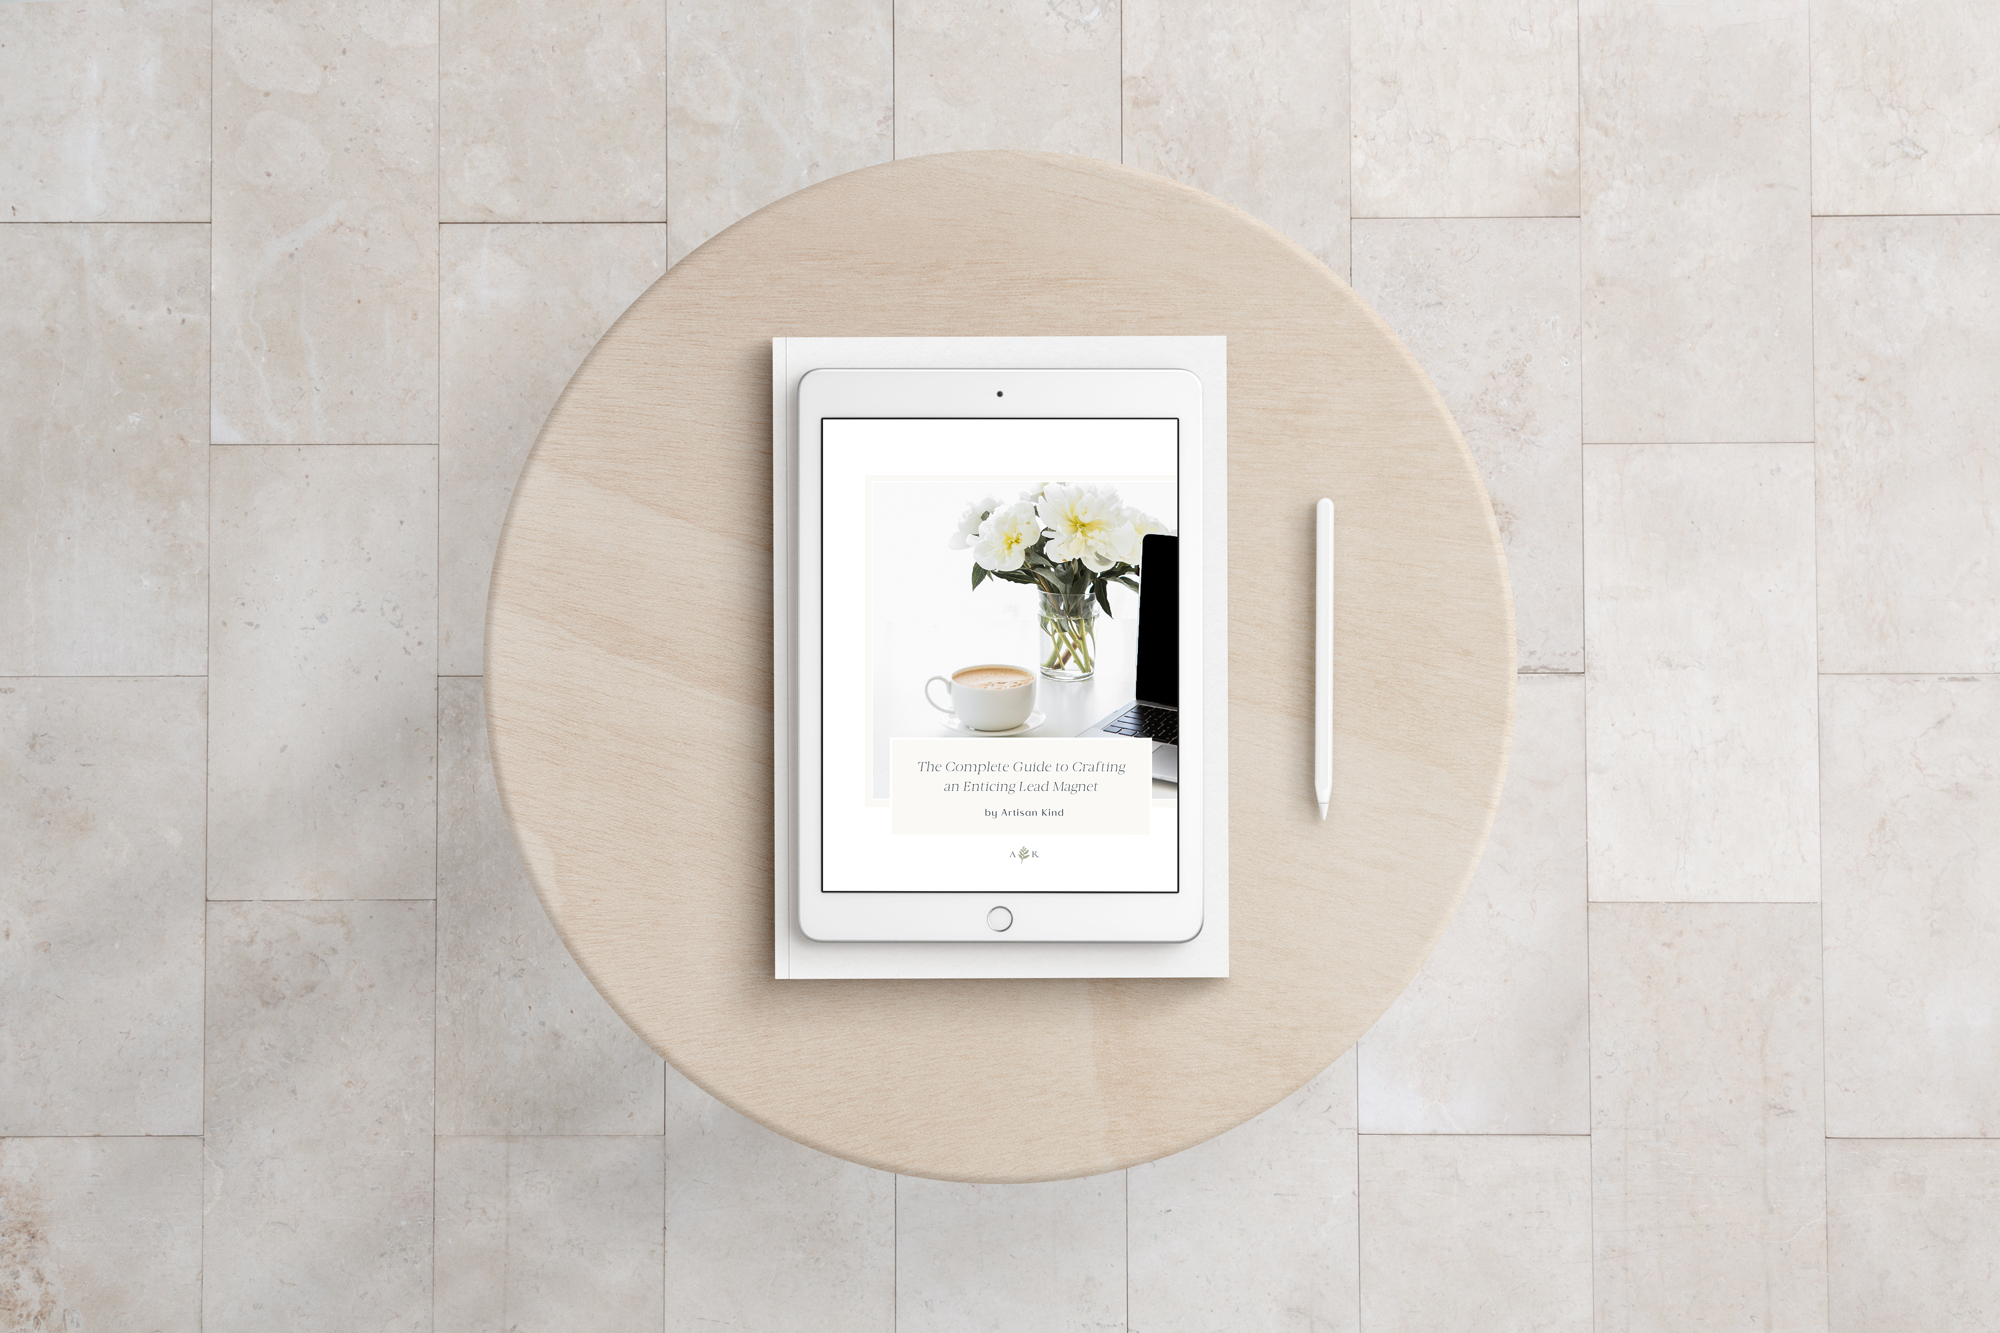 Ipad on round wooden table with image of a cup of coffee, bouquet of flowers and laptop